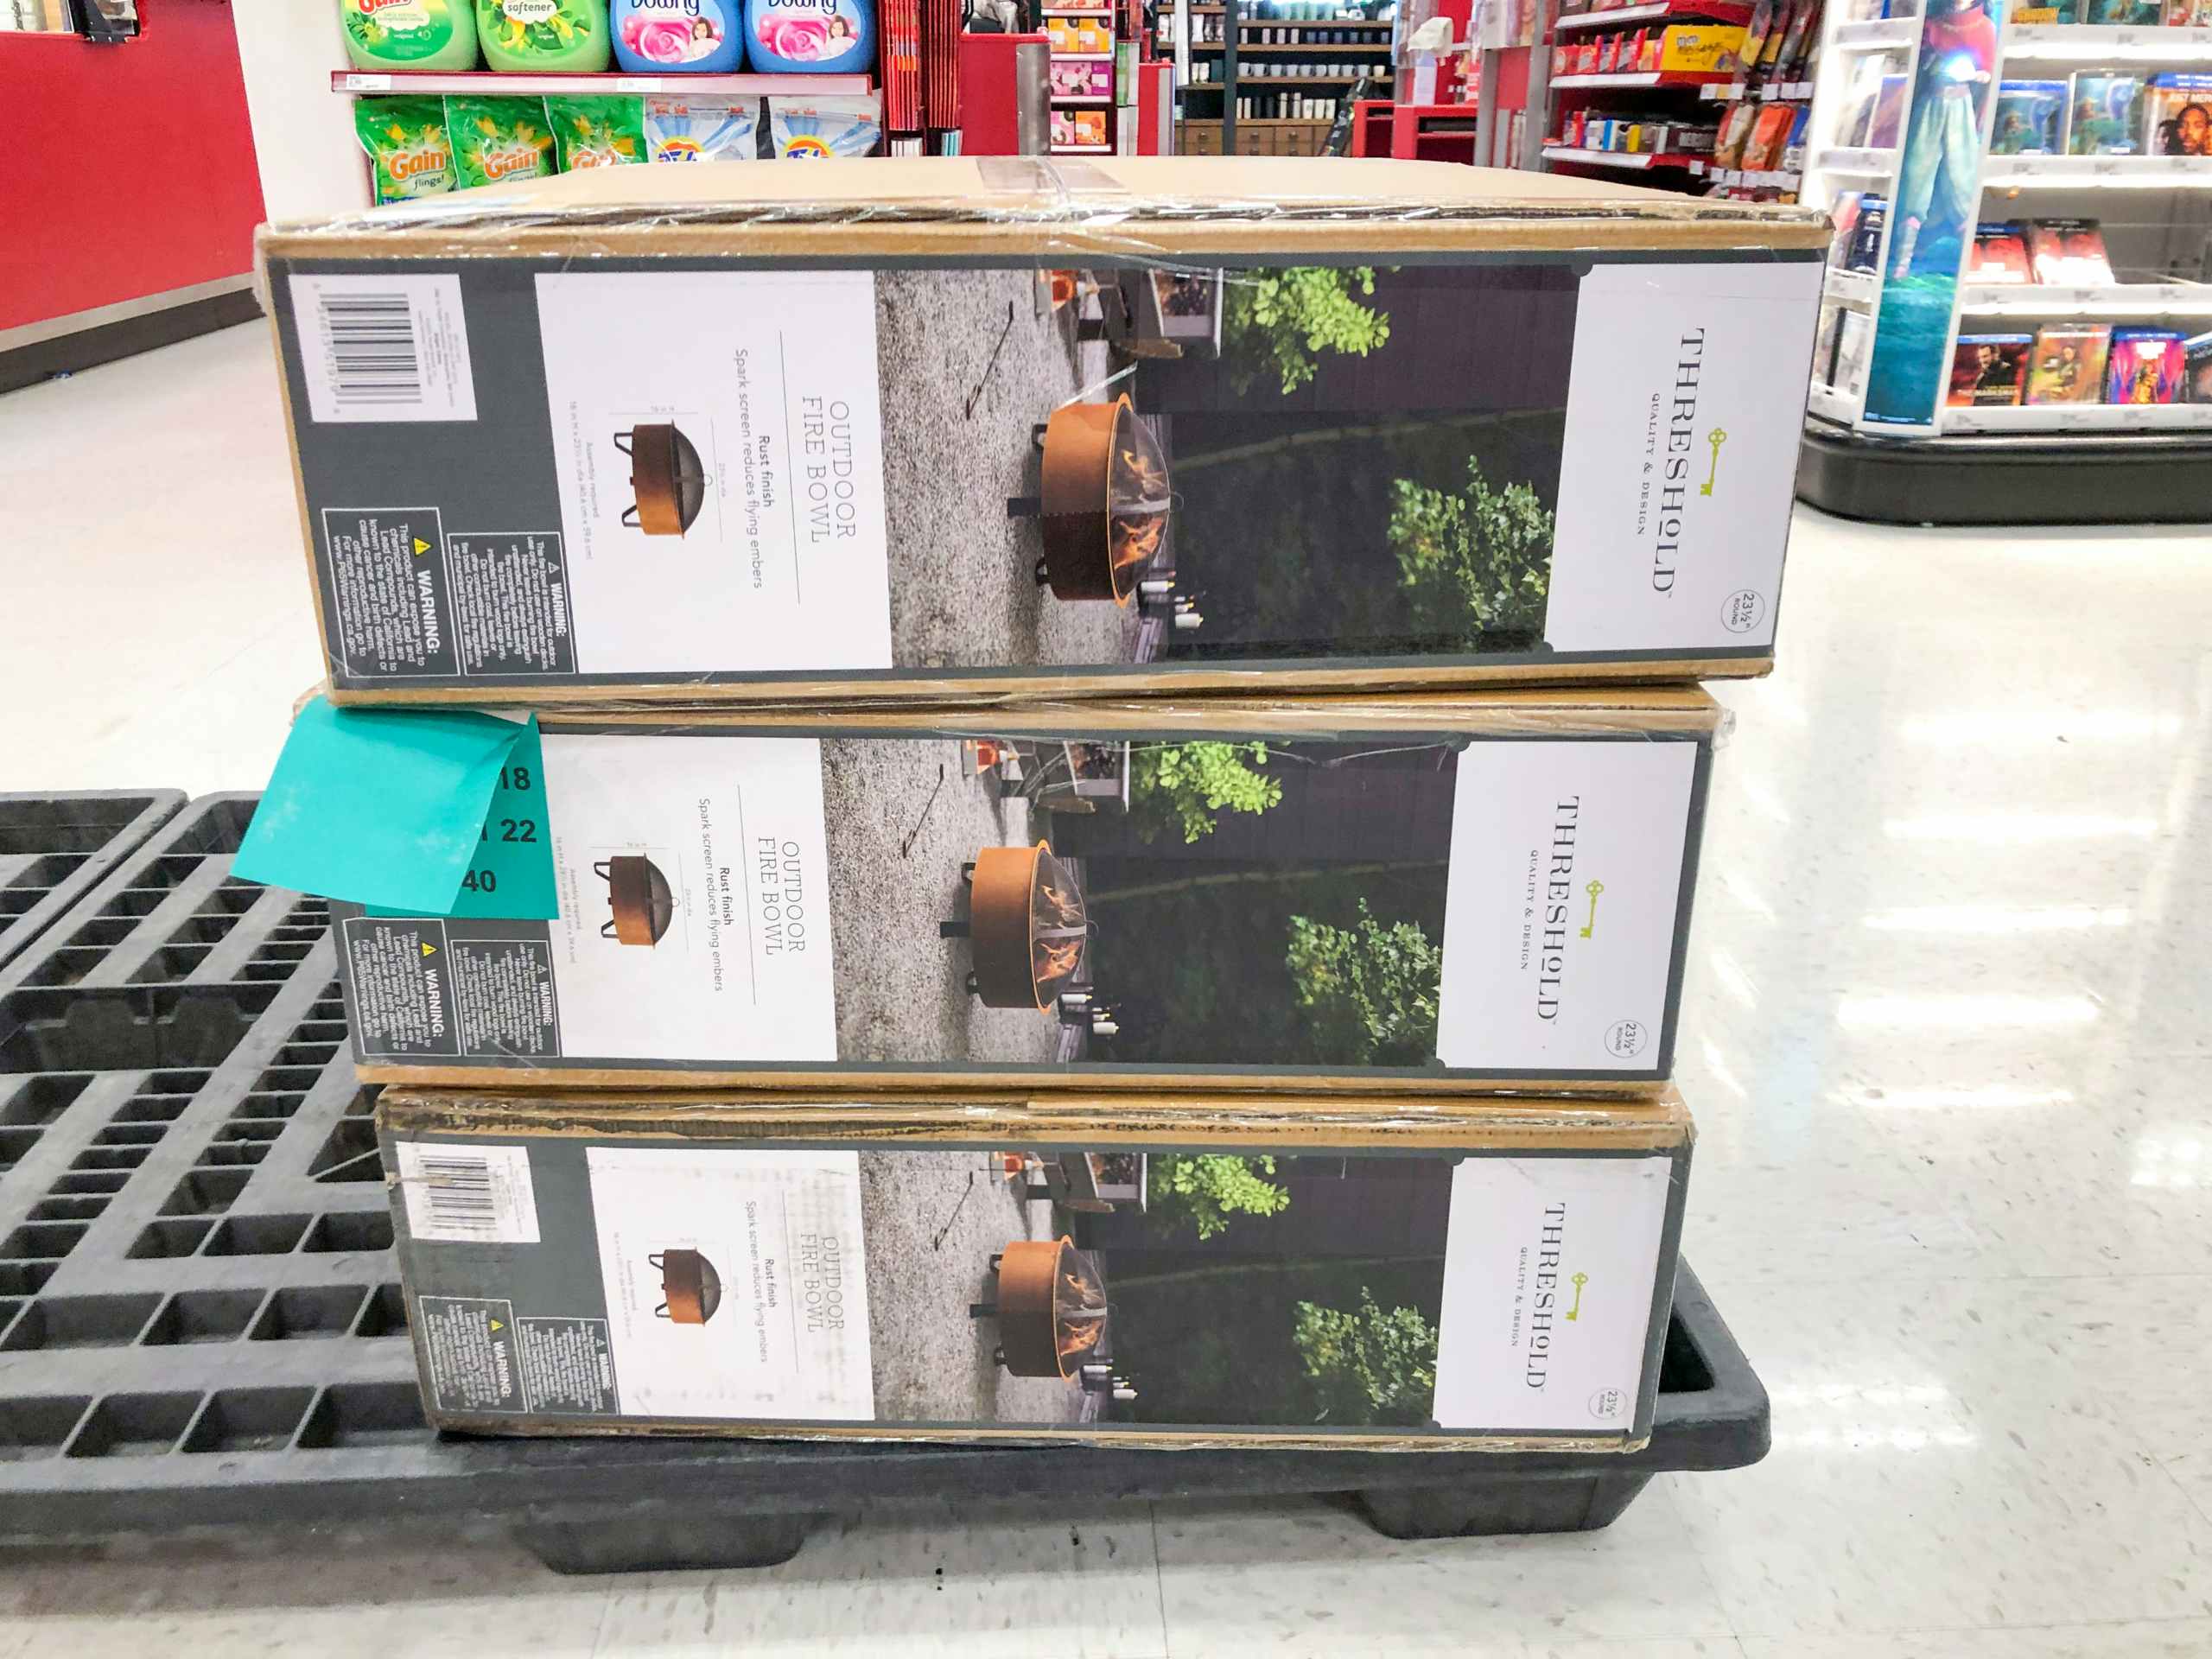 three boxes of fire pits stacked on a pallet inside Target